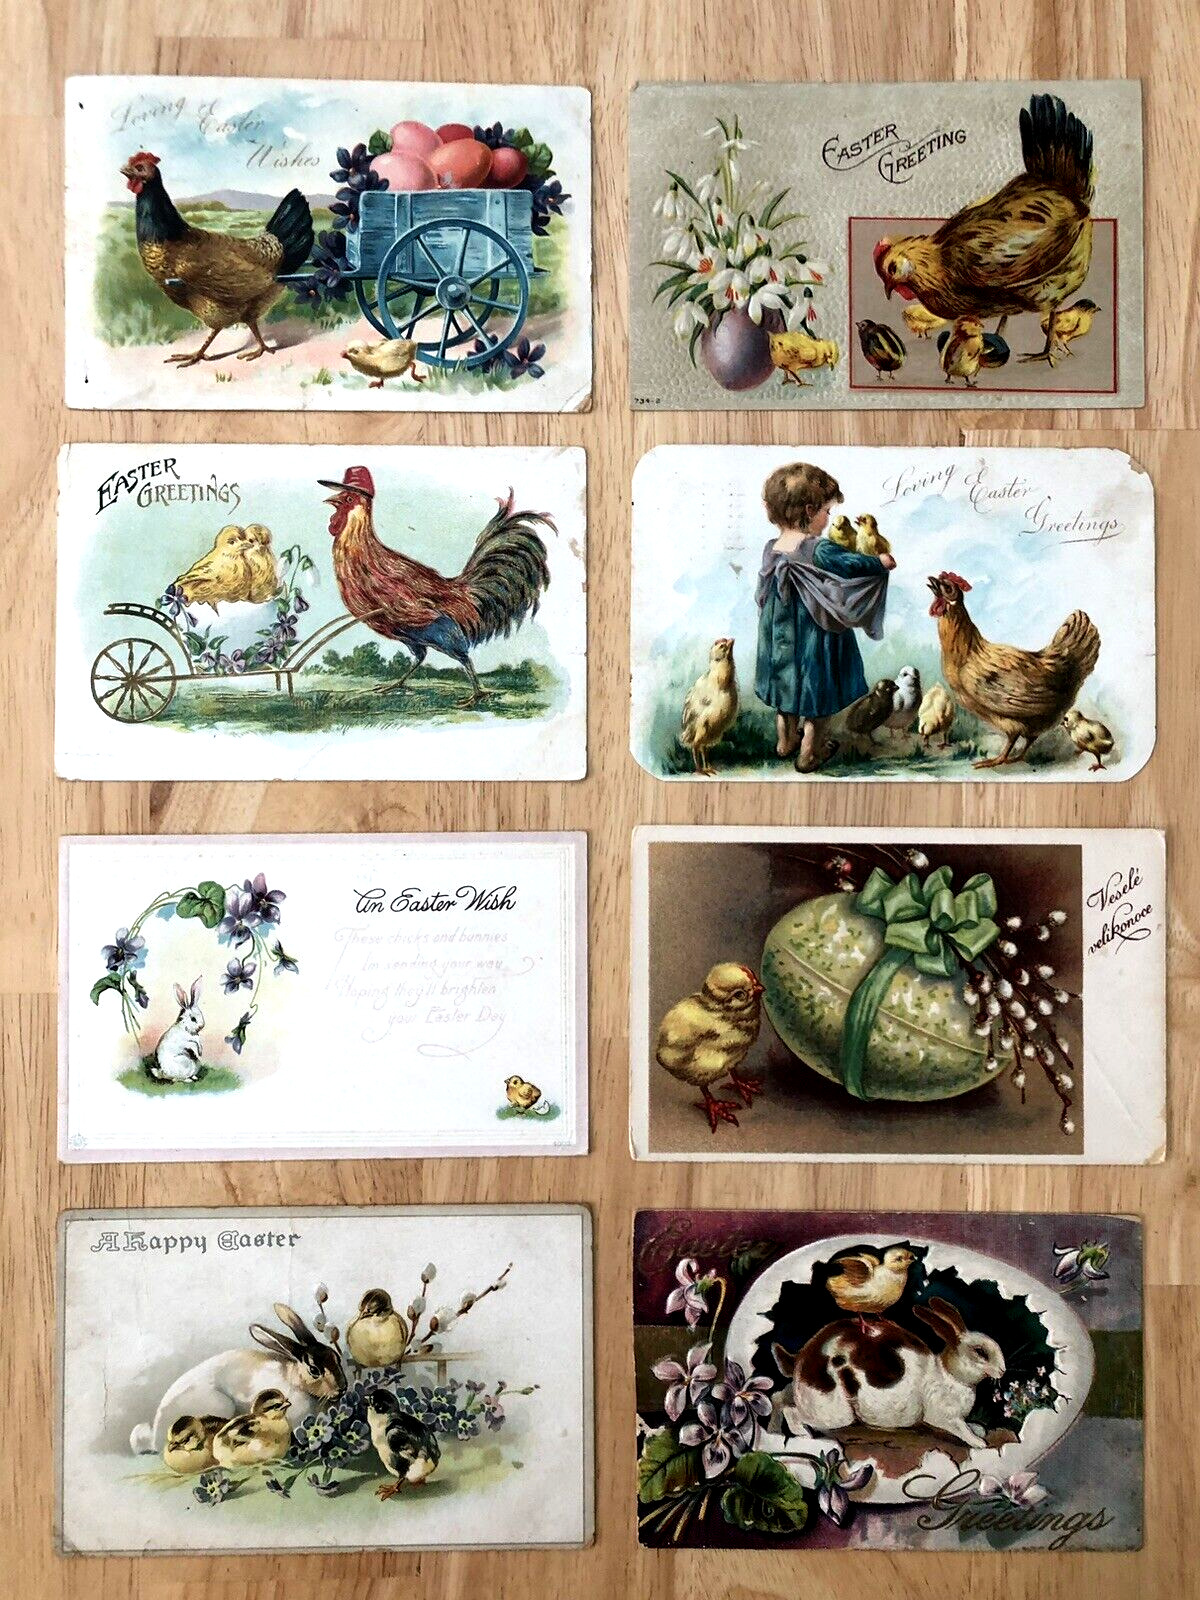 ANTIQUE EARLY 1900s LOT OF 8 EASTER CHICK POSTCARDS - 4 ONE CENT STAMPS